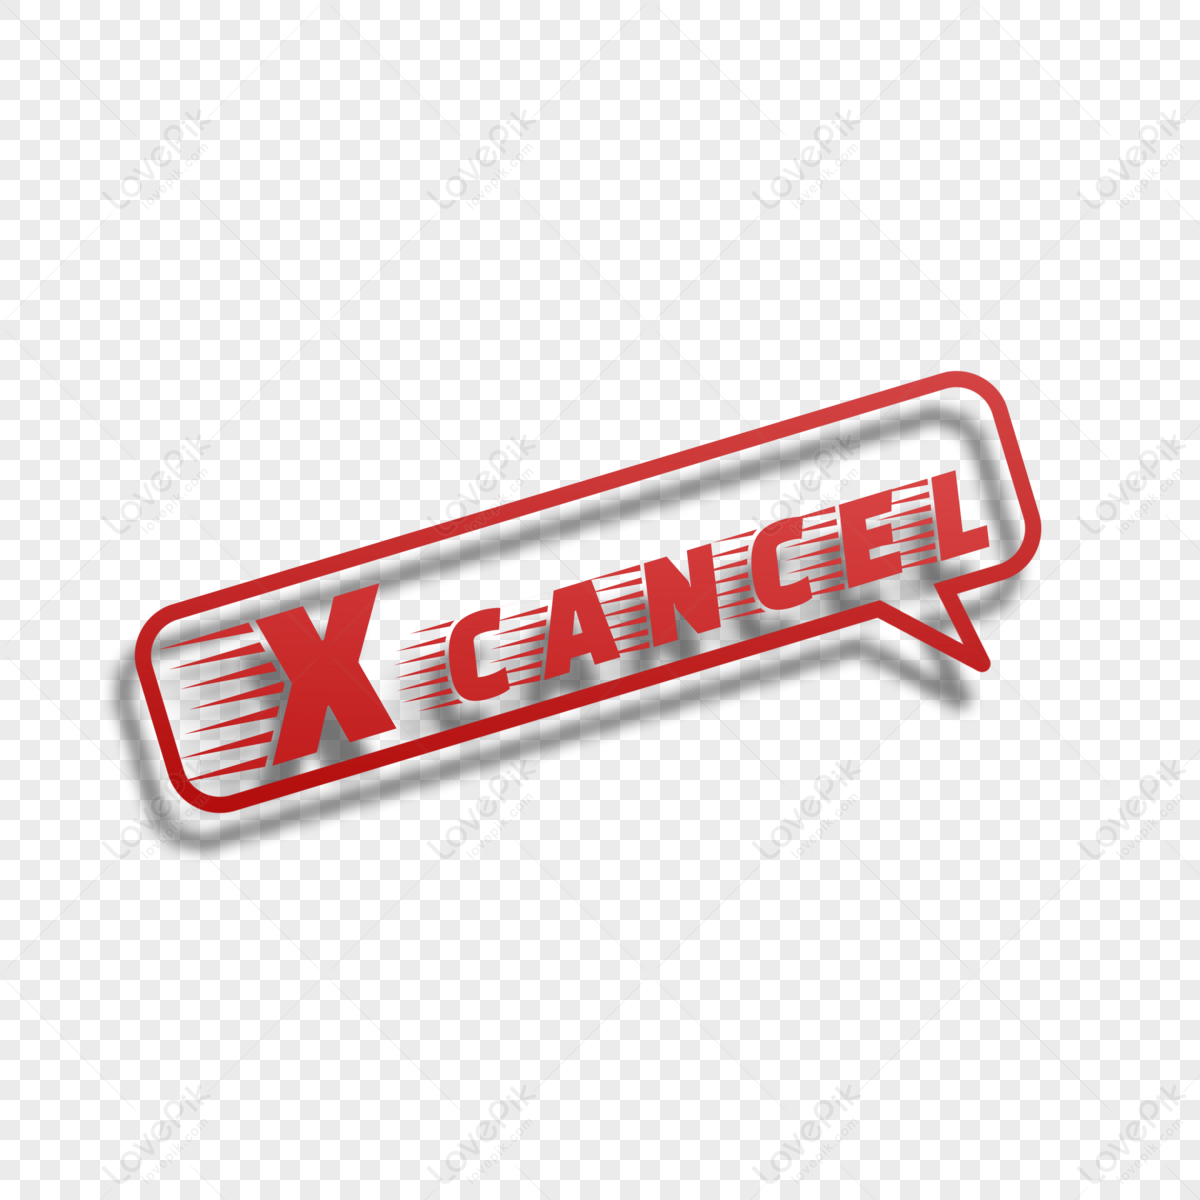 Cancel Icon PNG Images, Vectors Free Download - Pngtree